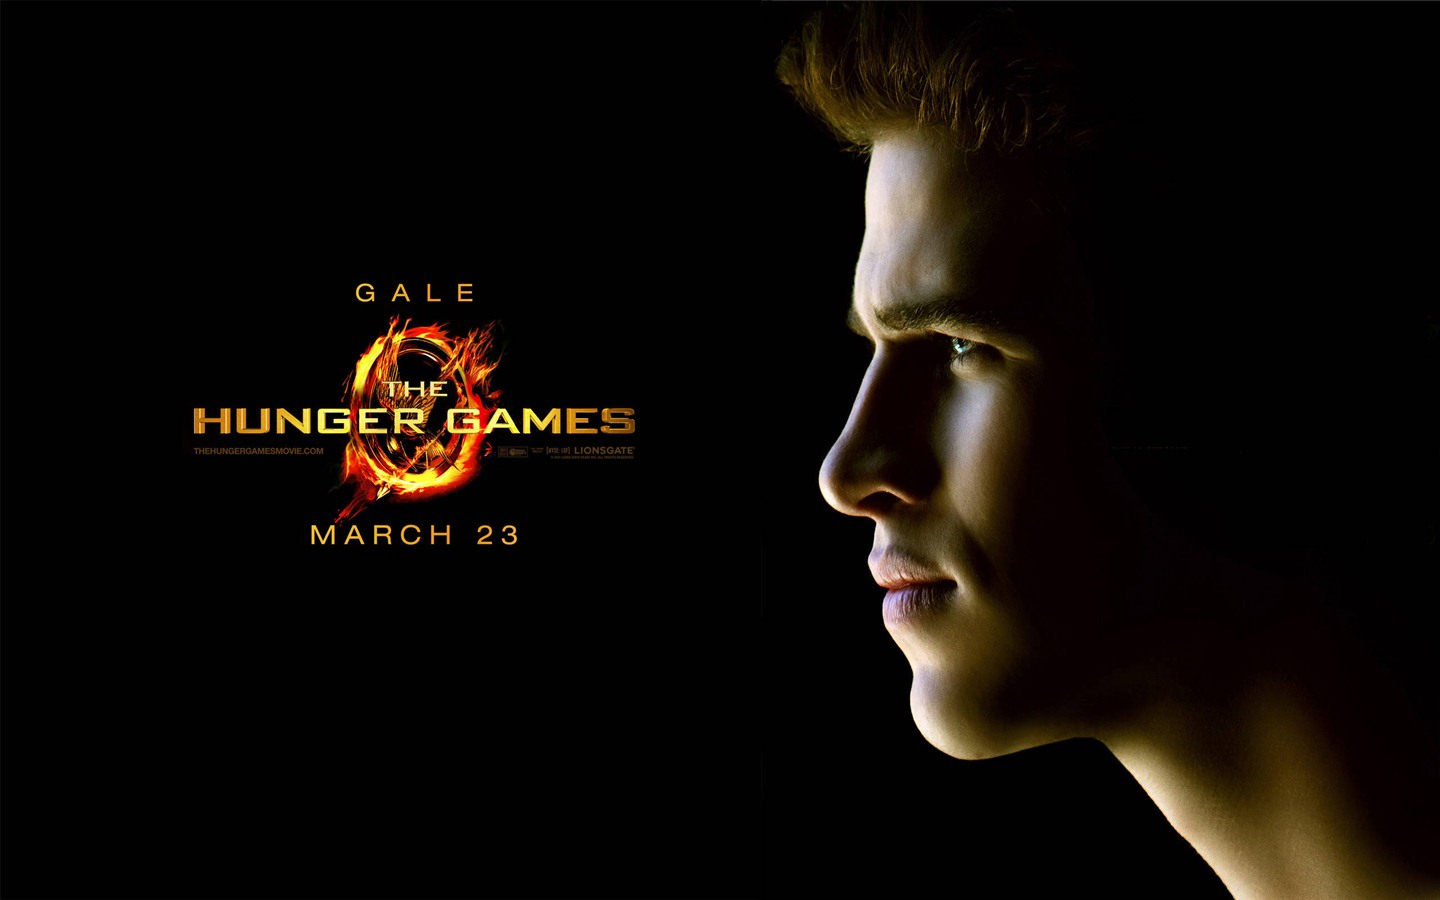 The Hunger Games HD wallpapers #4 - 1440x900